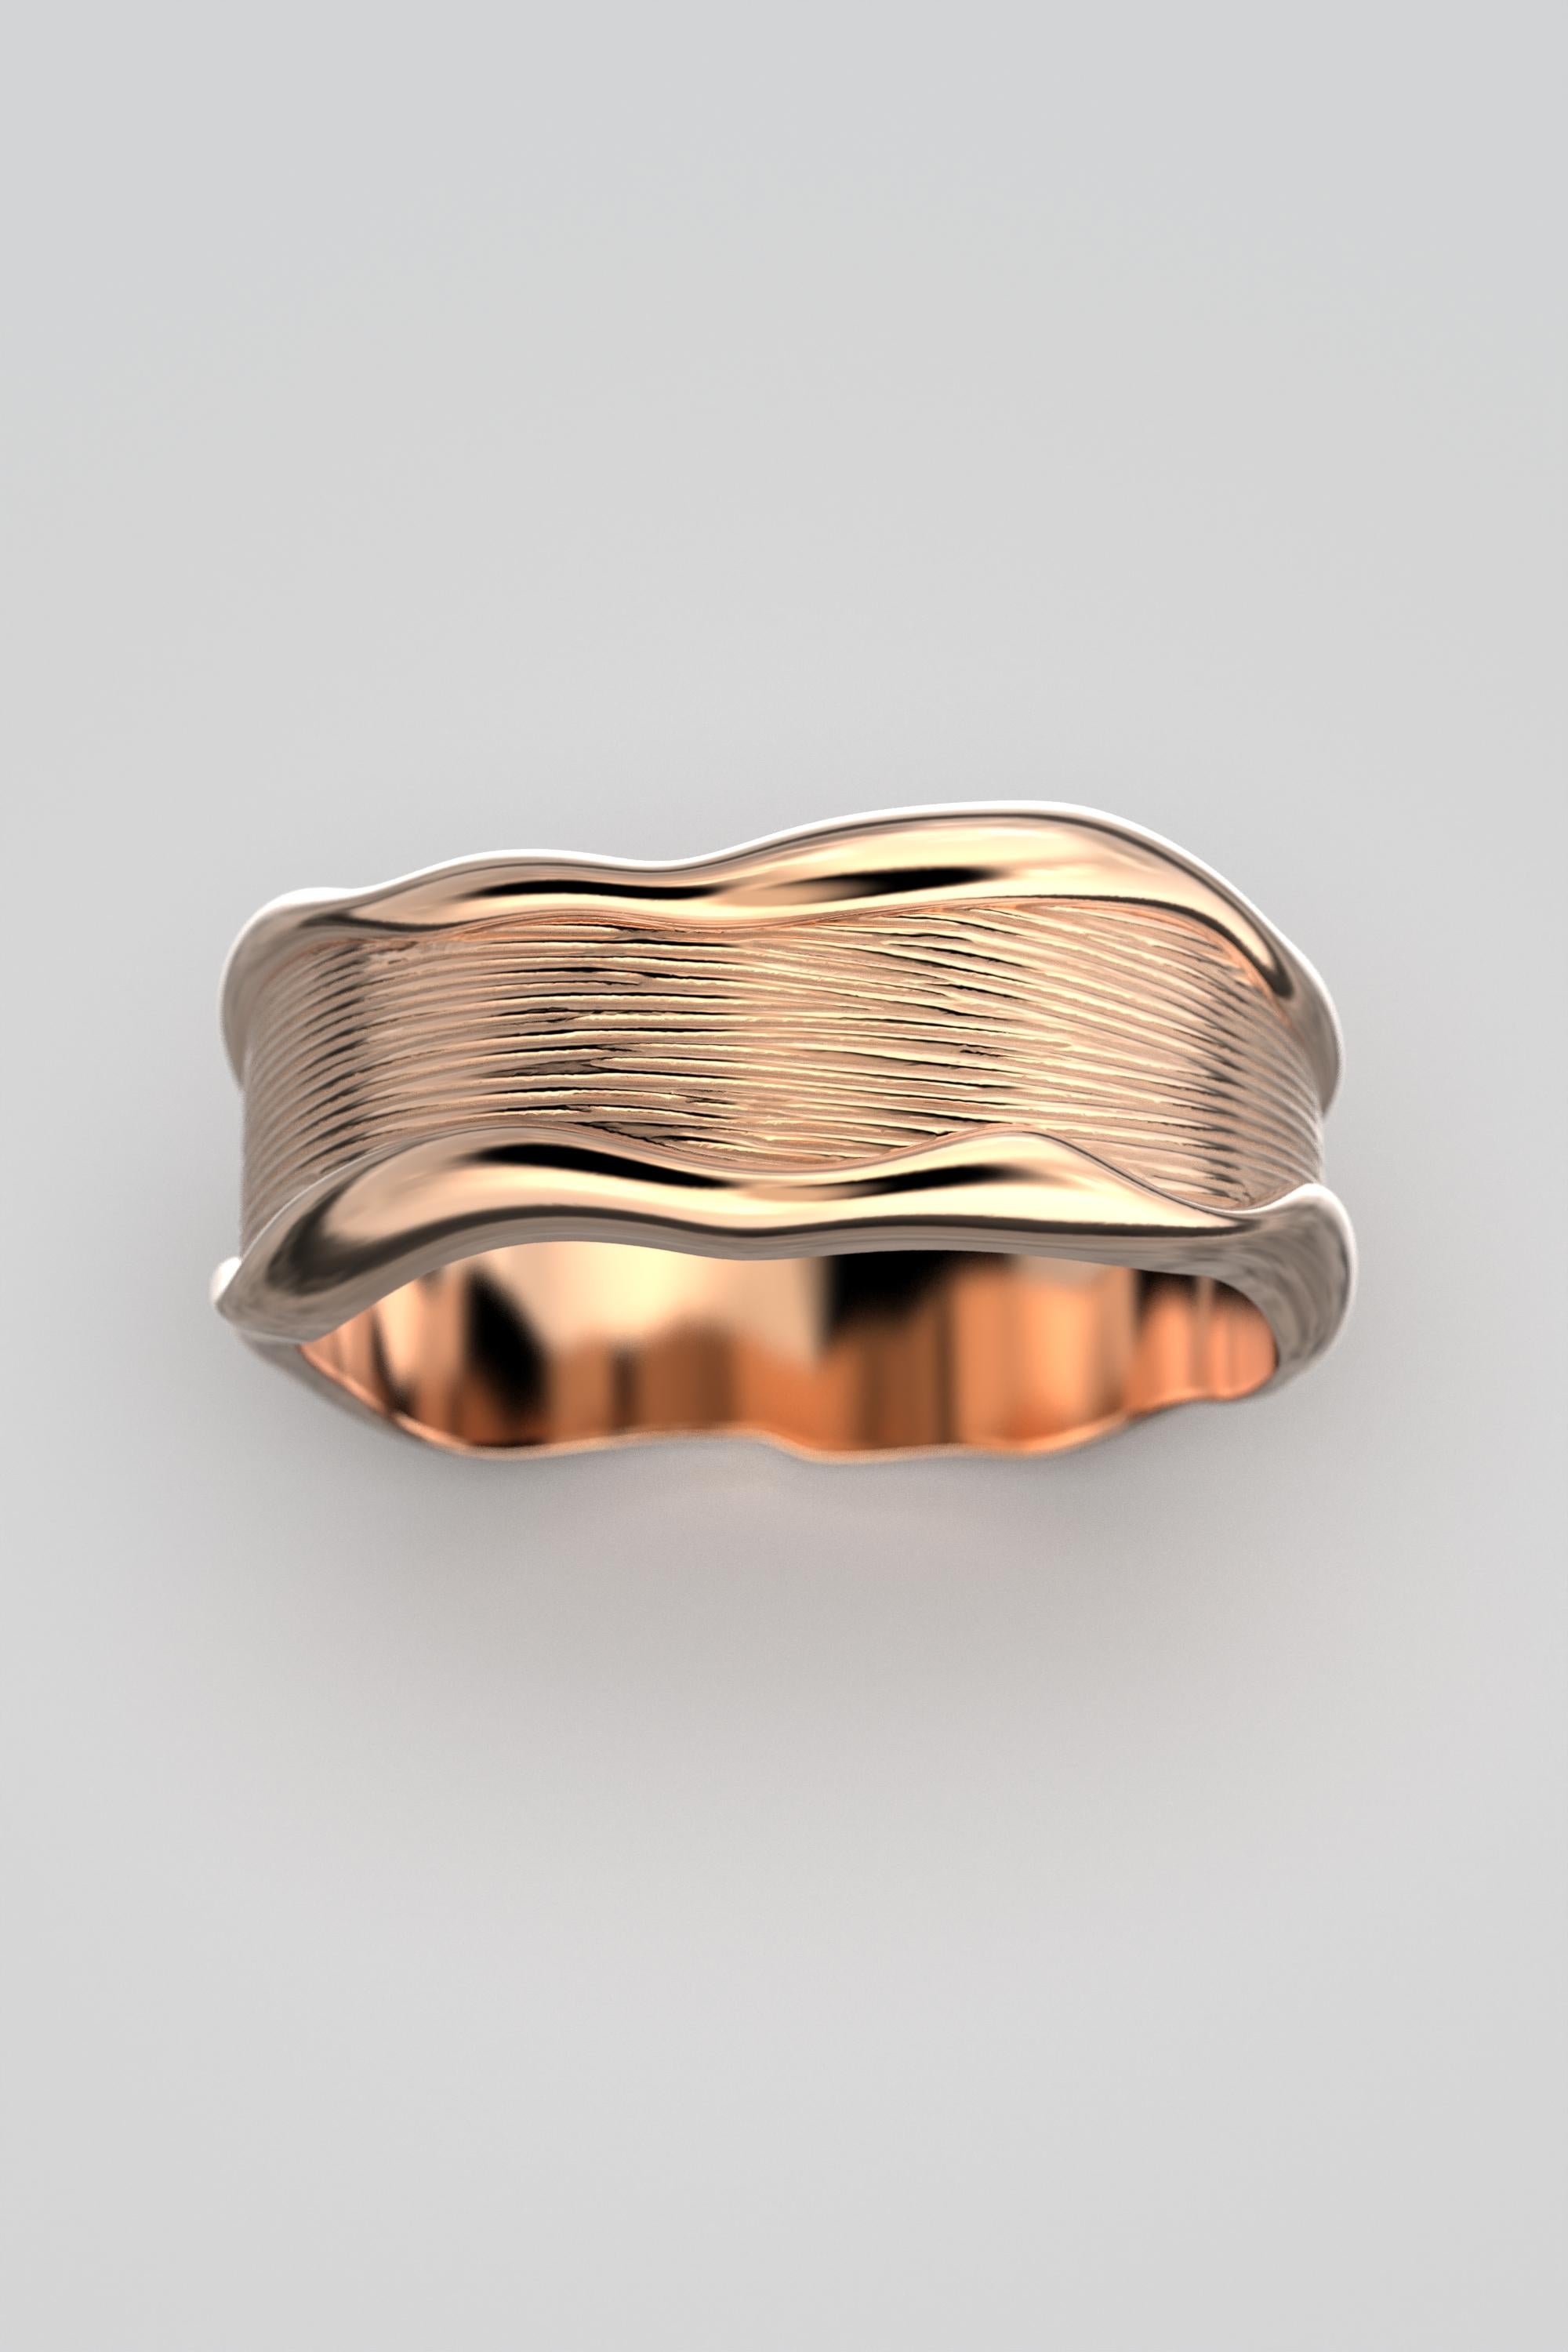 For Sale:  Hand-Engraved Unisex 18k Gold Band Ring Made in Italy by Oltremare Gioielli 5